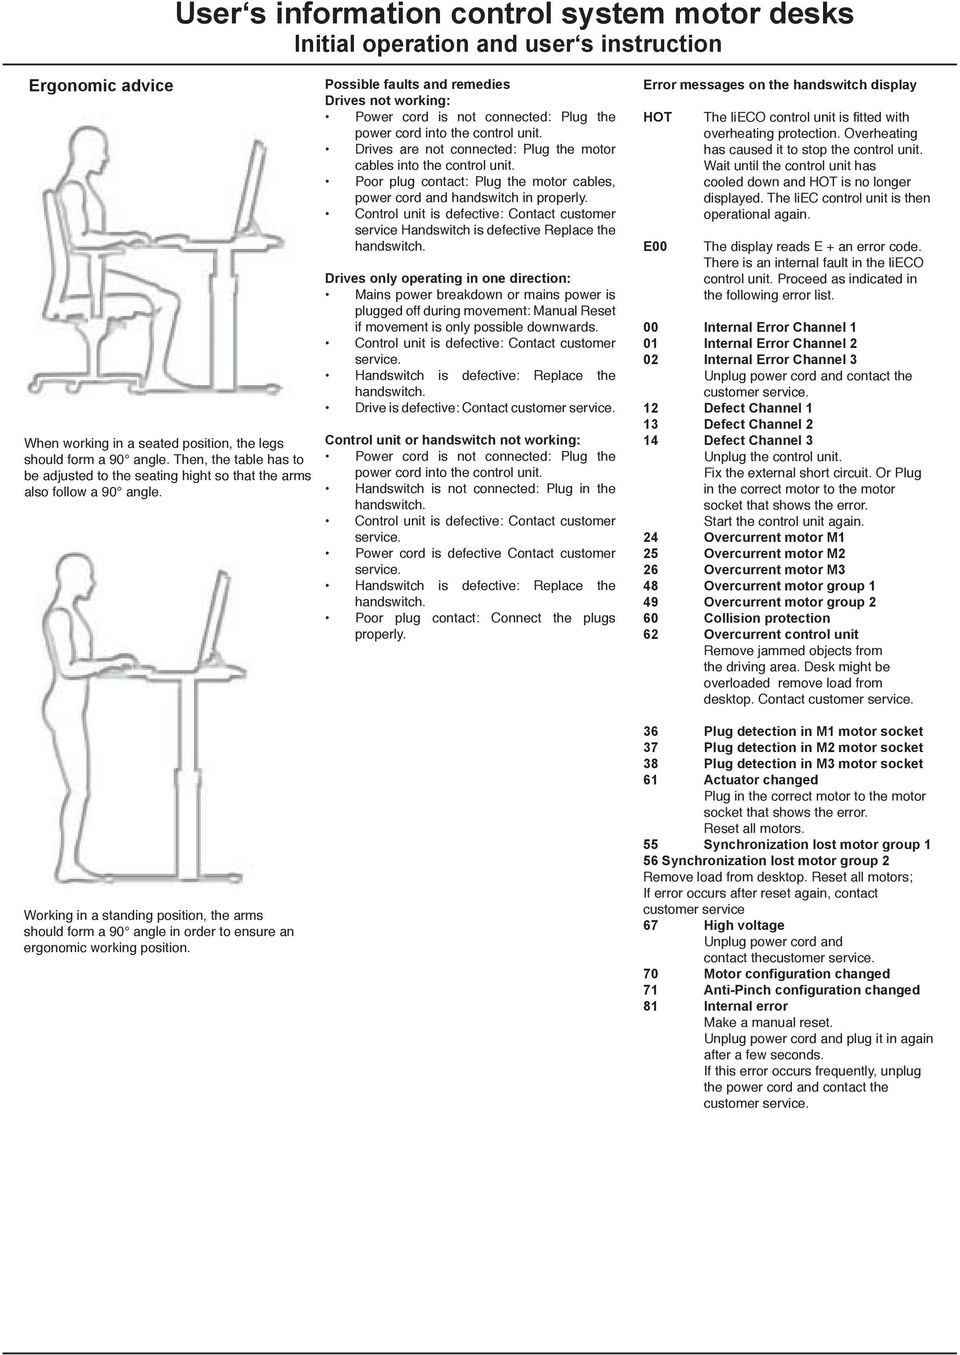 Working in a standing position, the arms should form a 90 angle in order to ensure an ergonomic working position.